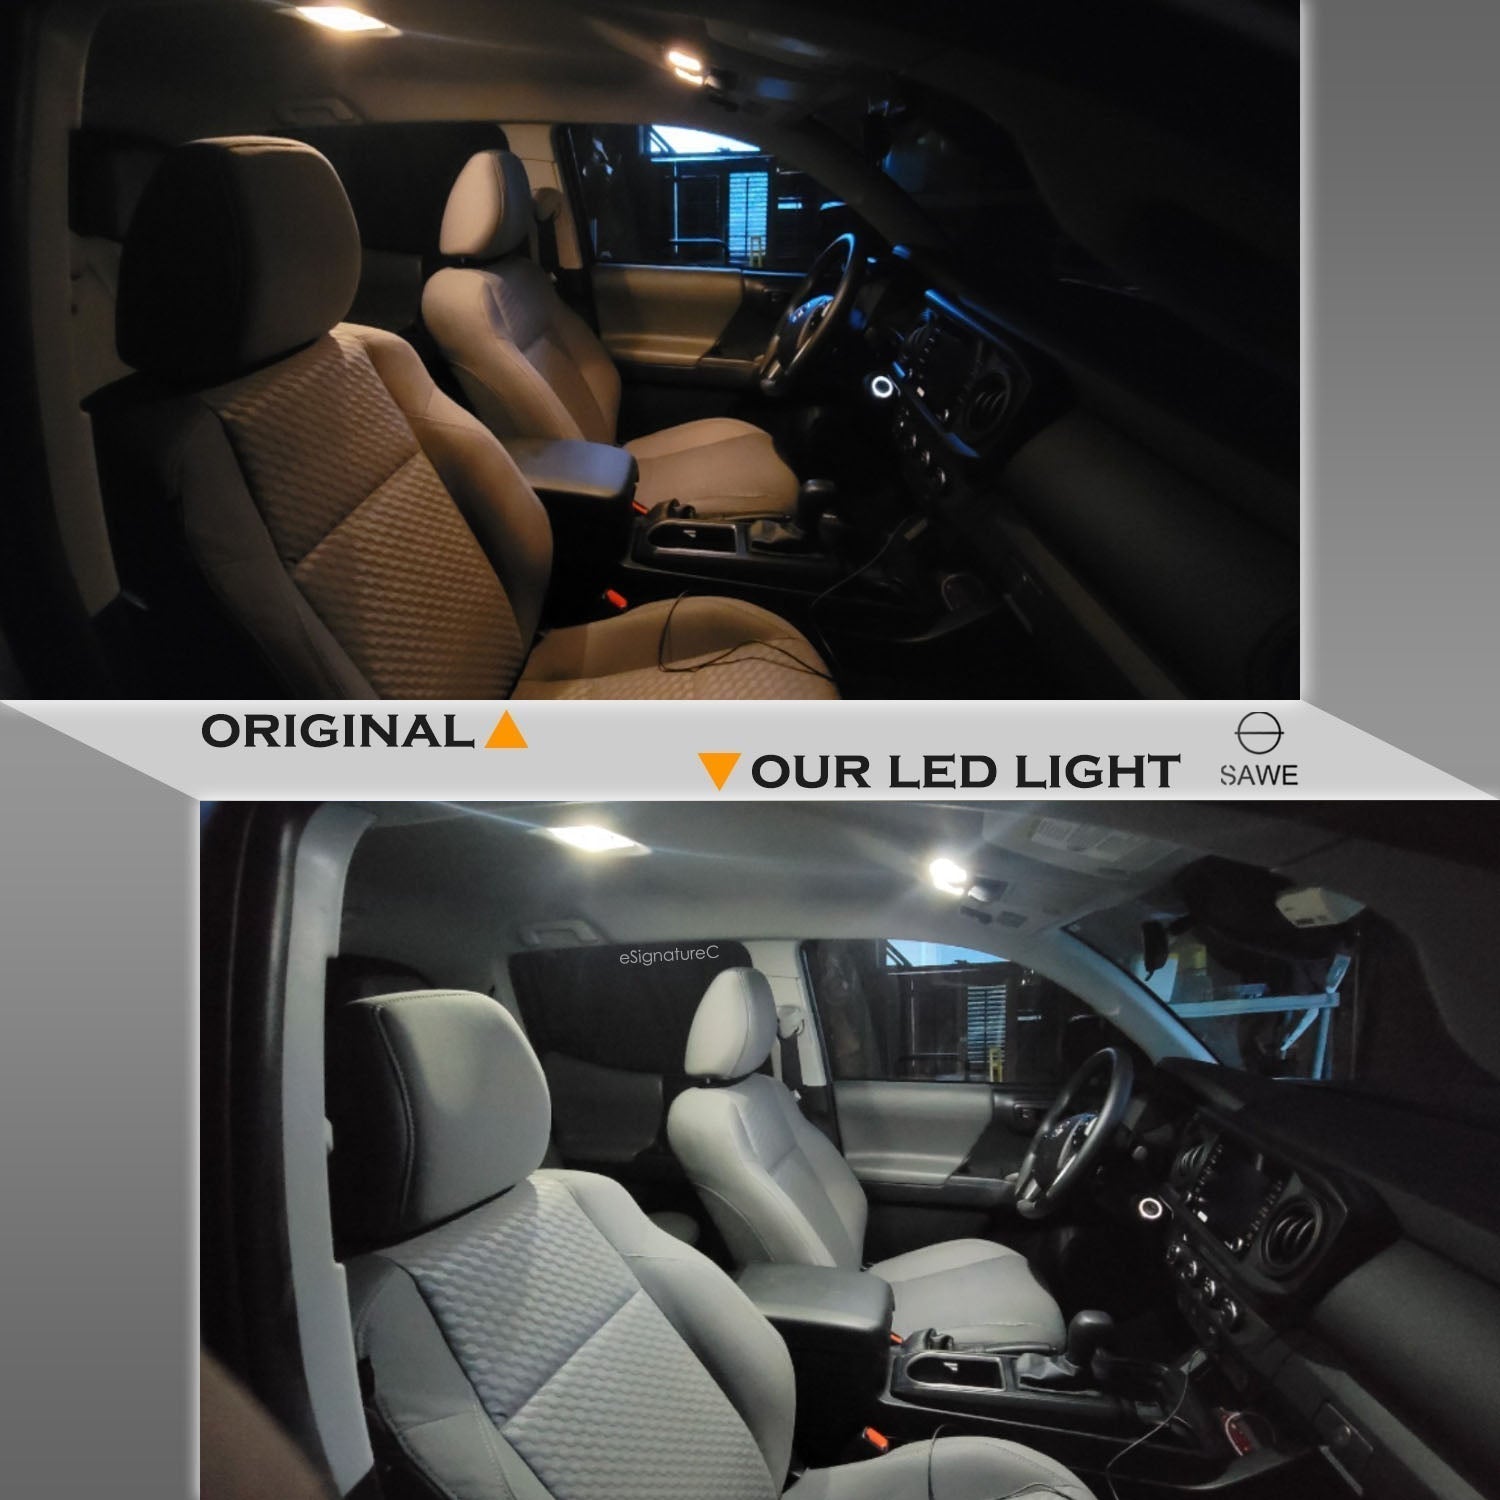 For BMW X1 Interior LED Lights - Dome & Map Light Bulb Package Kit for 2013 - 2015 - White